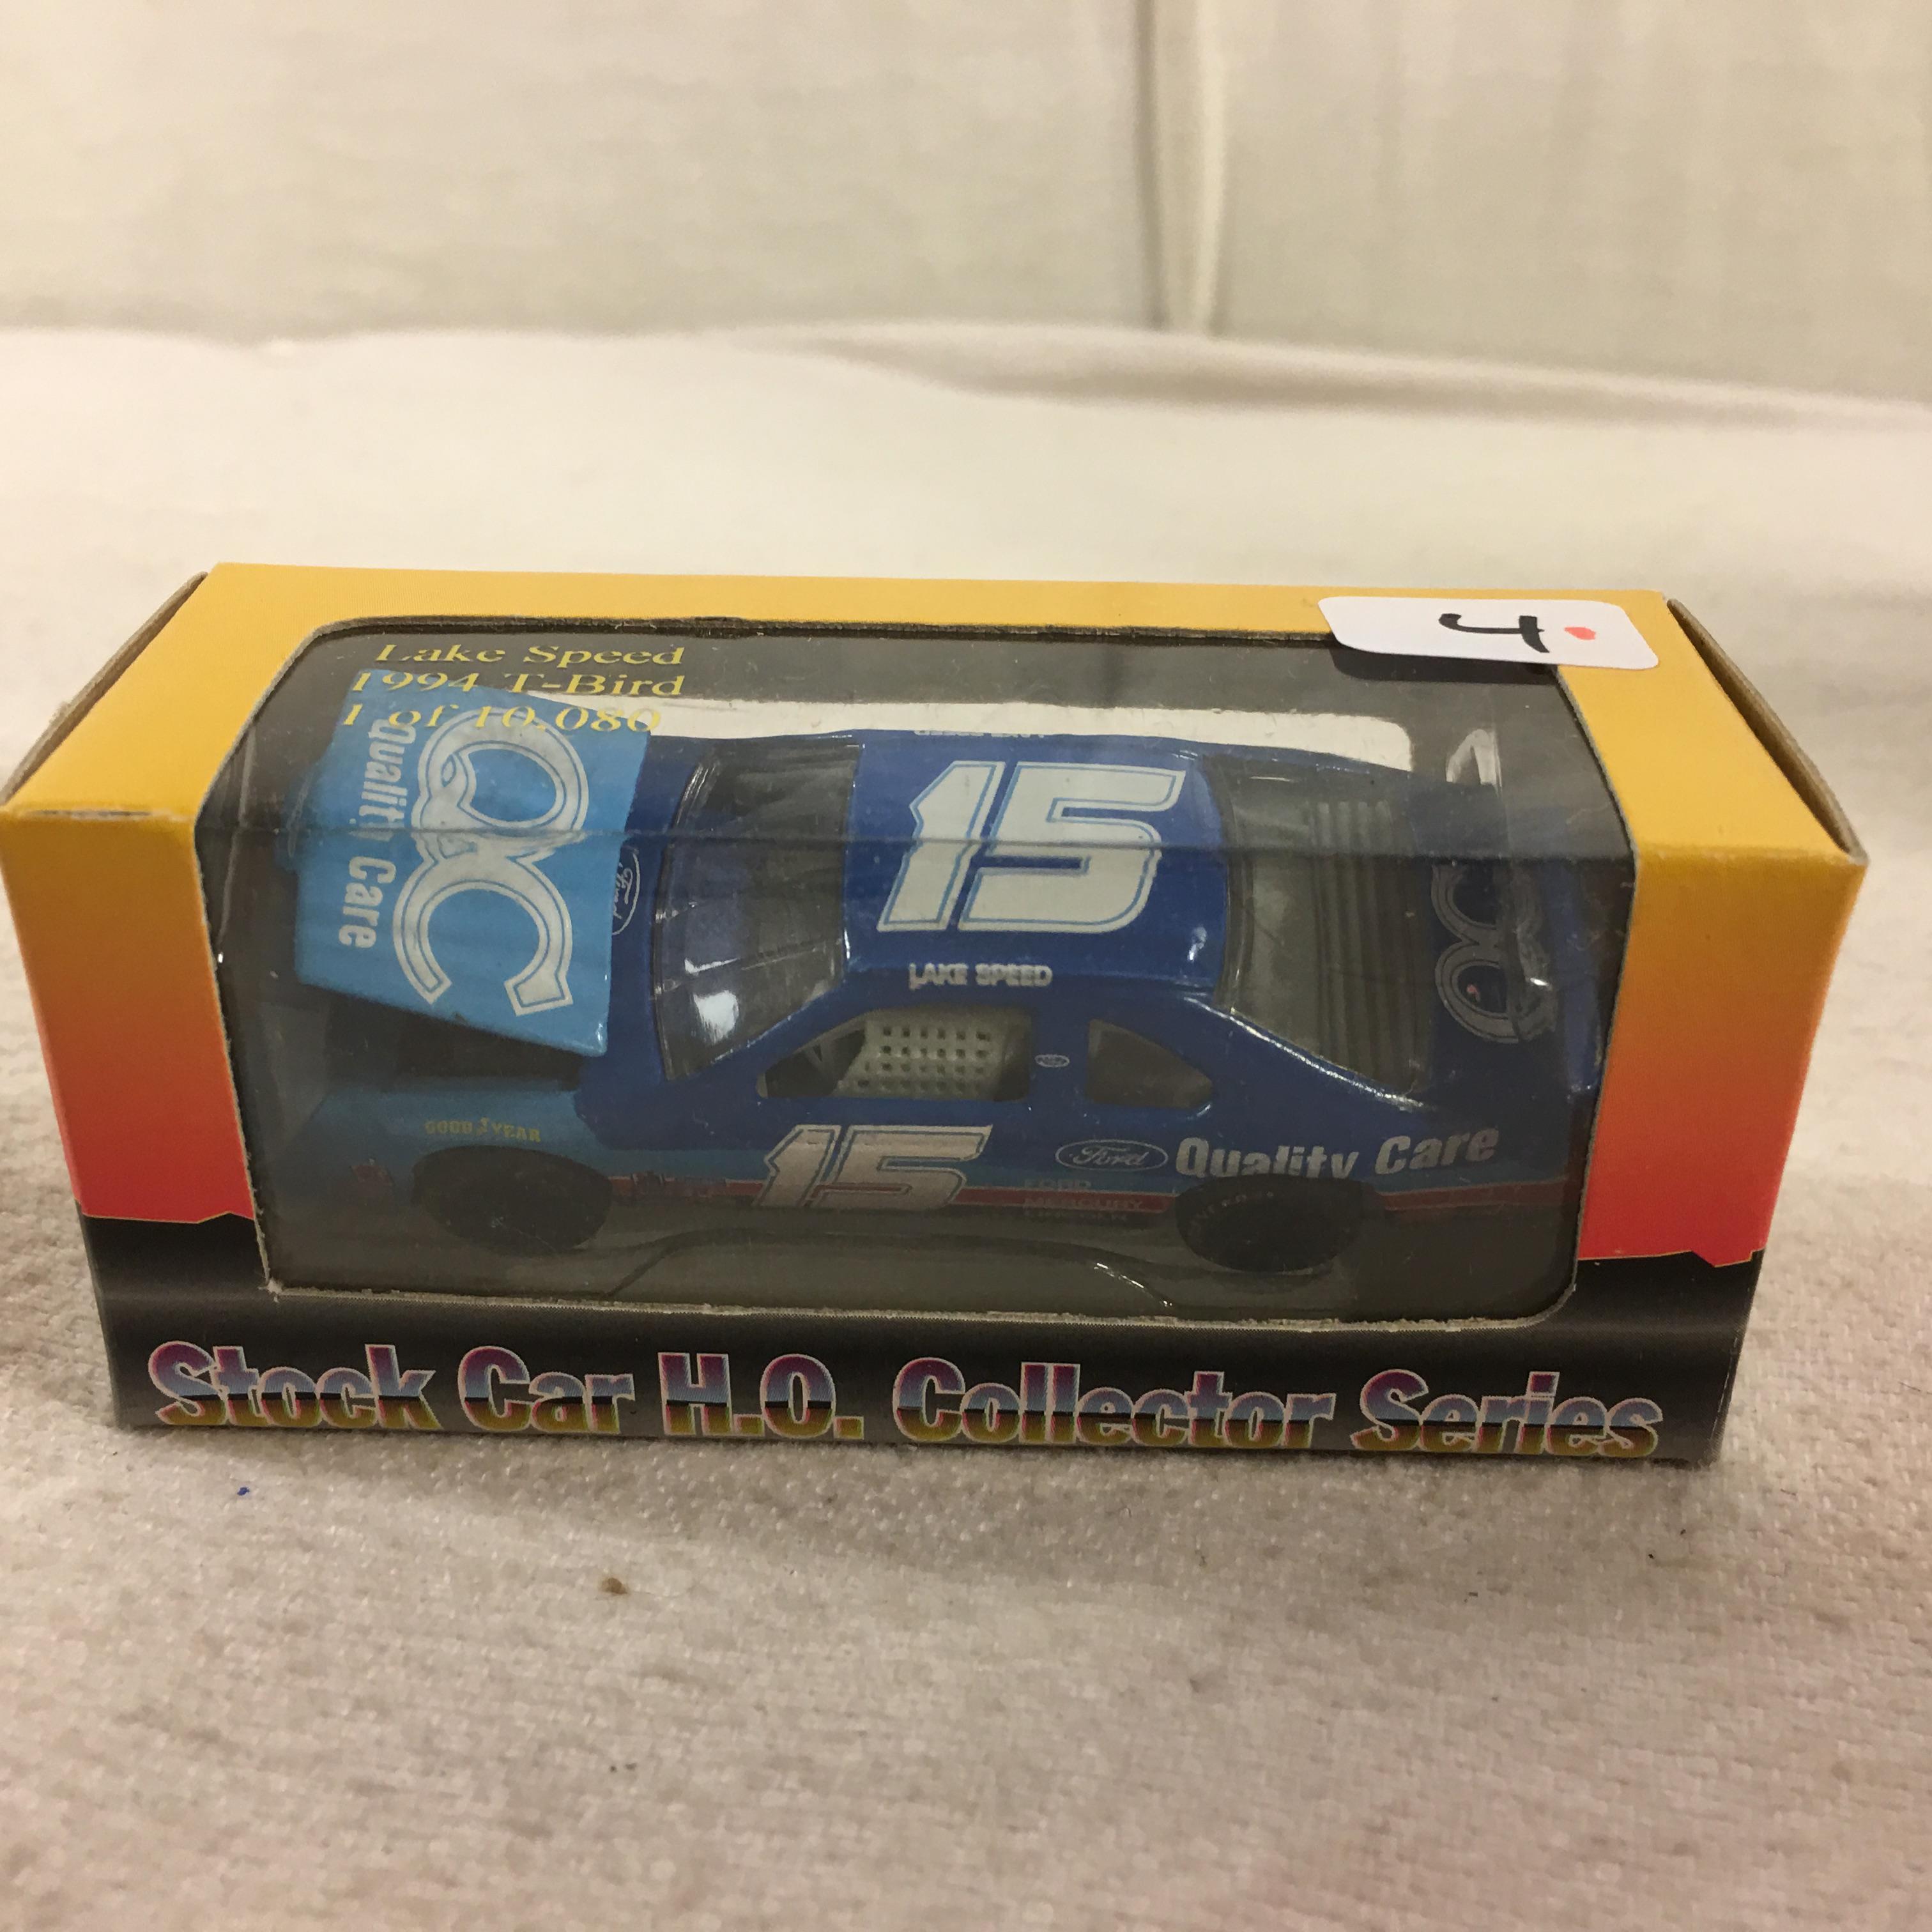 NIP Nascar Racing Collectables Club Of America Stock Car H.O. Scale Series #15 Lake Speed T-Bird